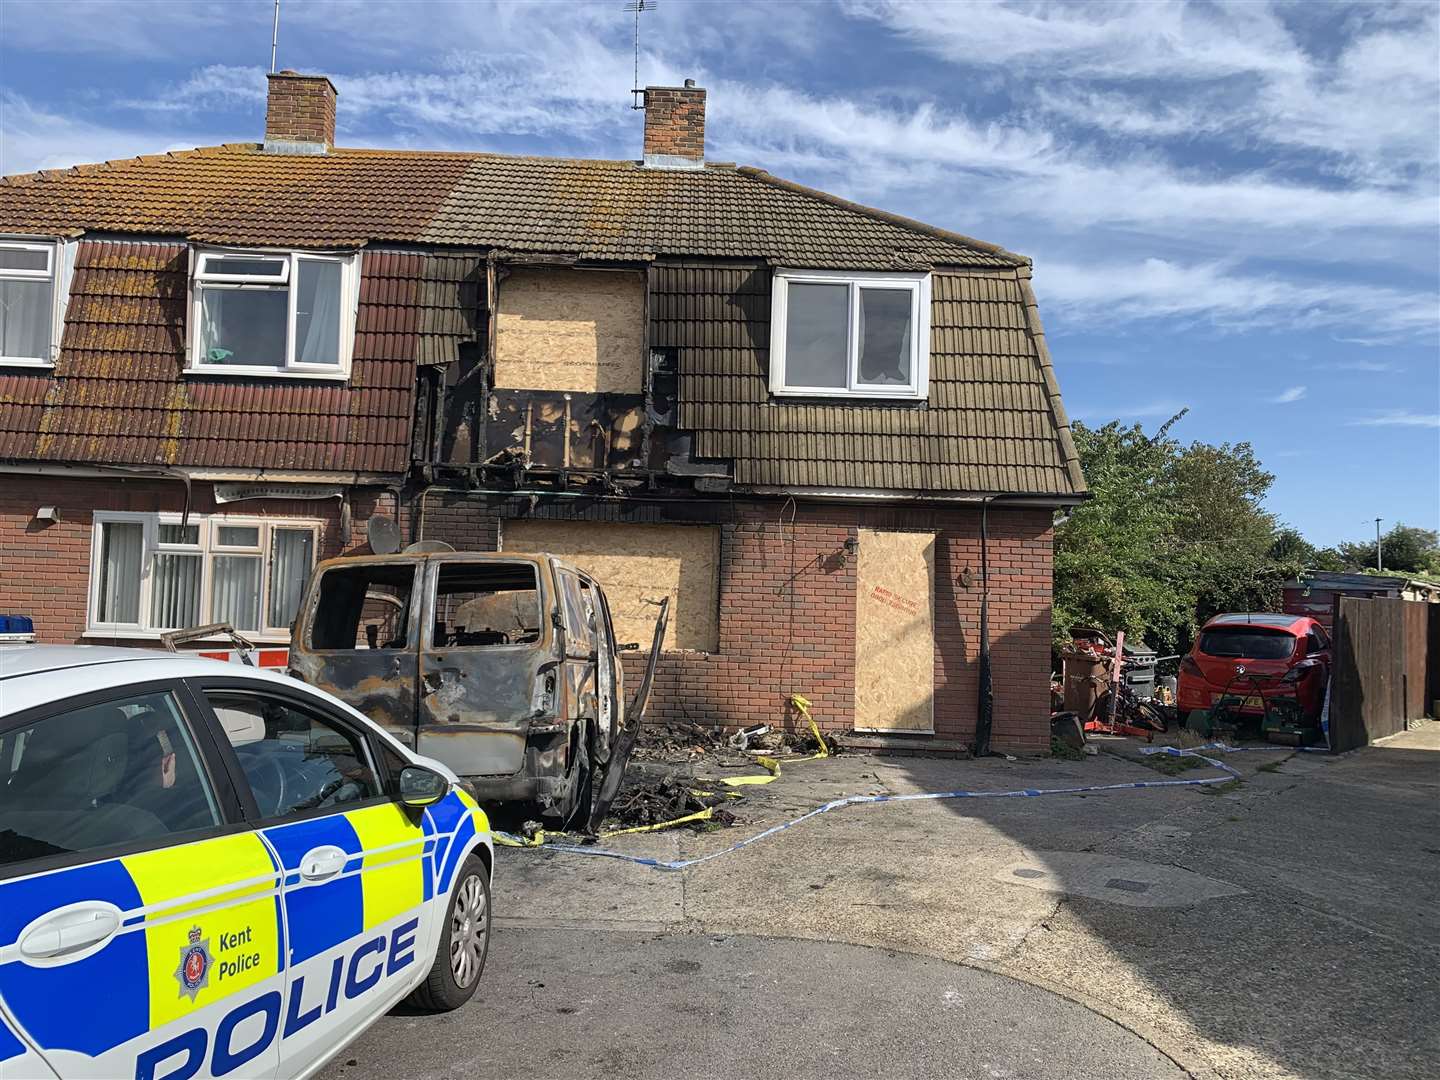 The aftermath of the fire in St James Close, Isle of Grain